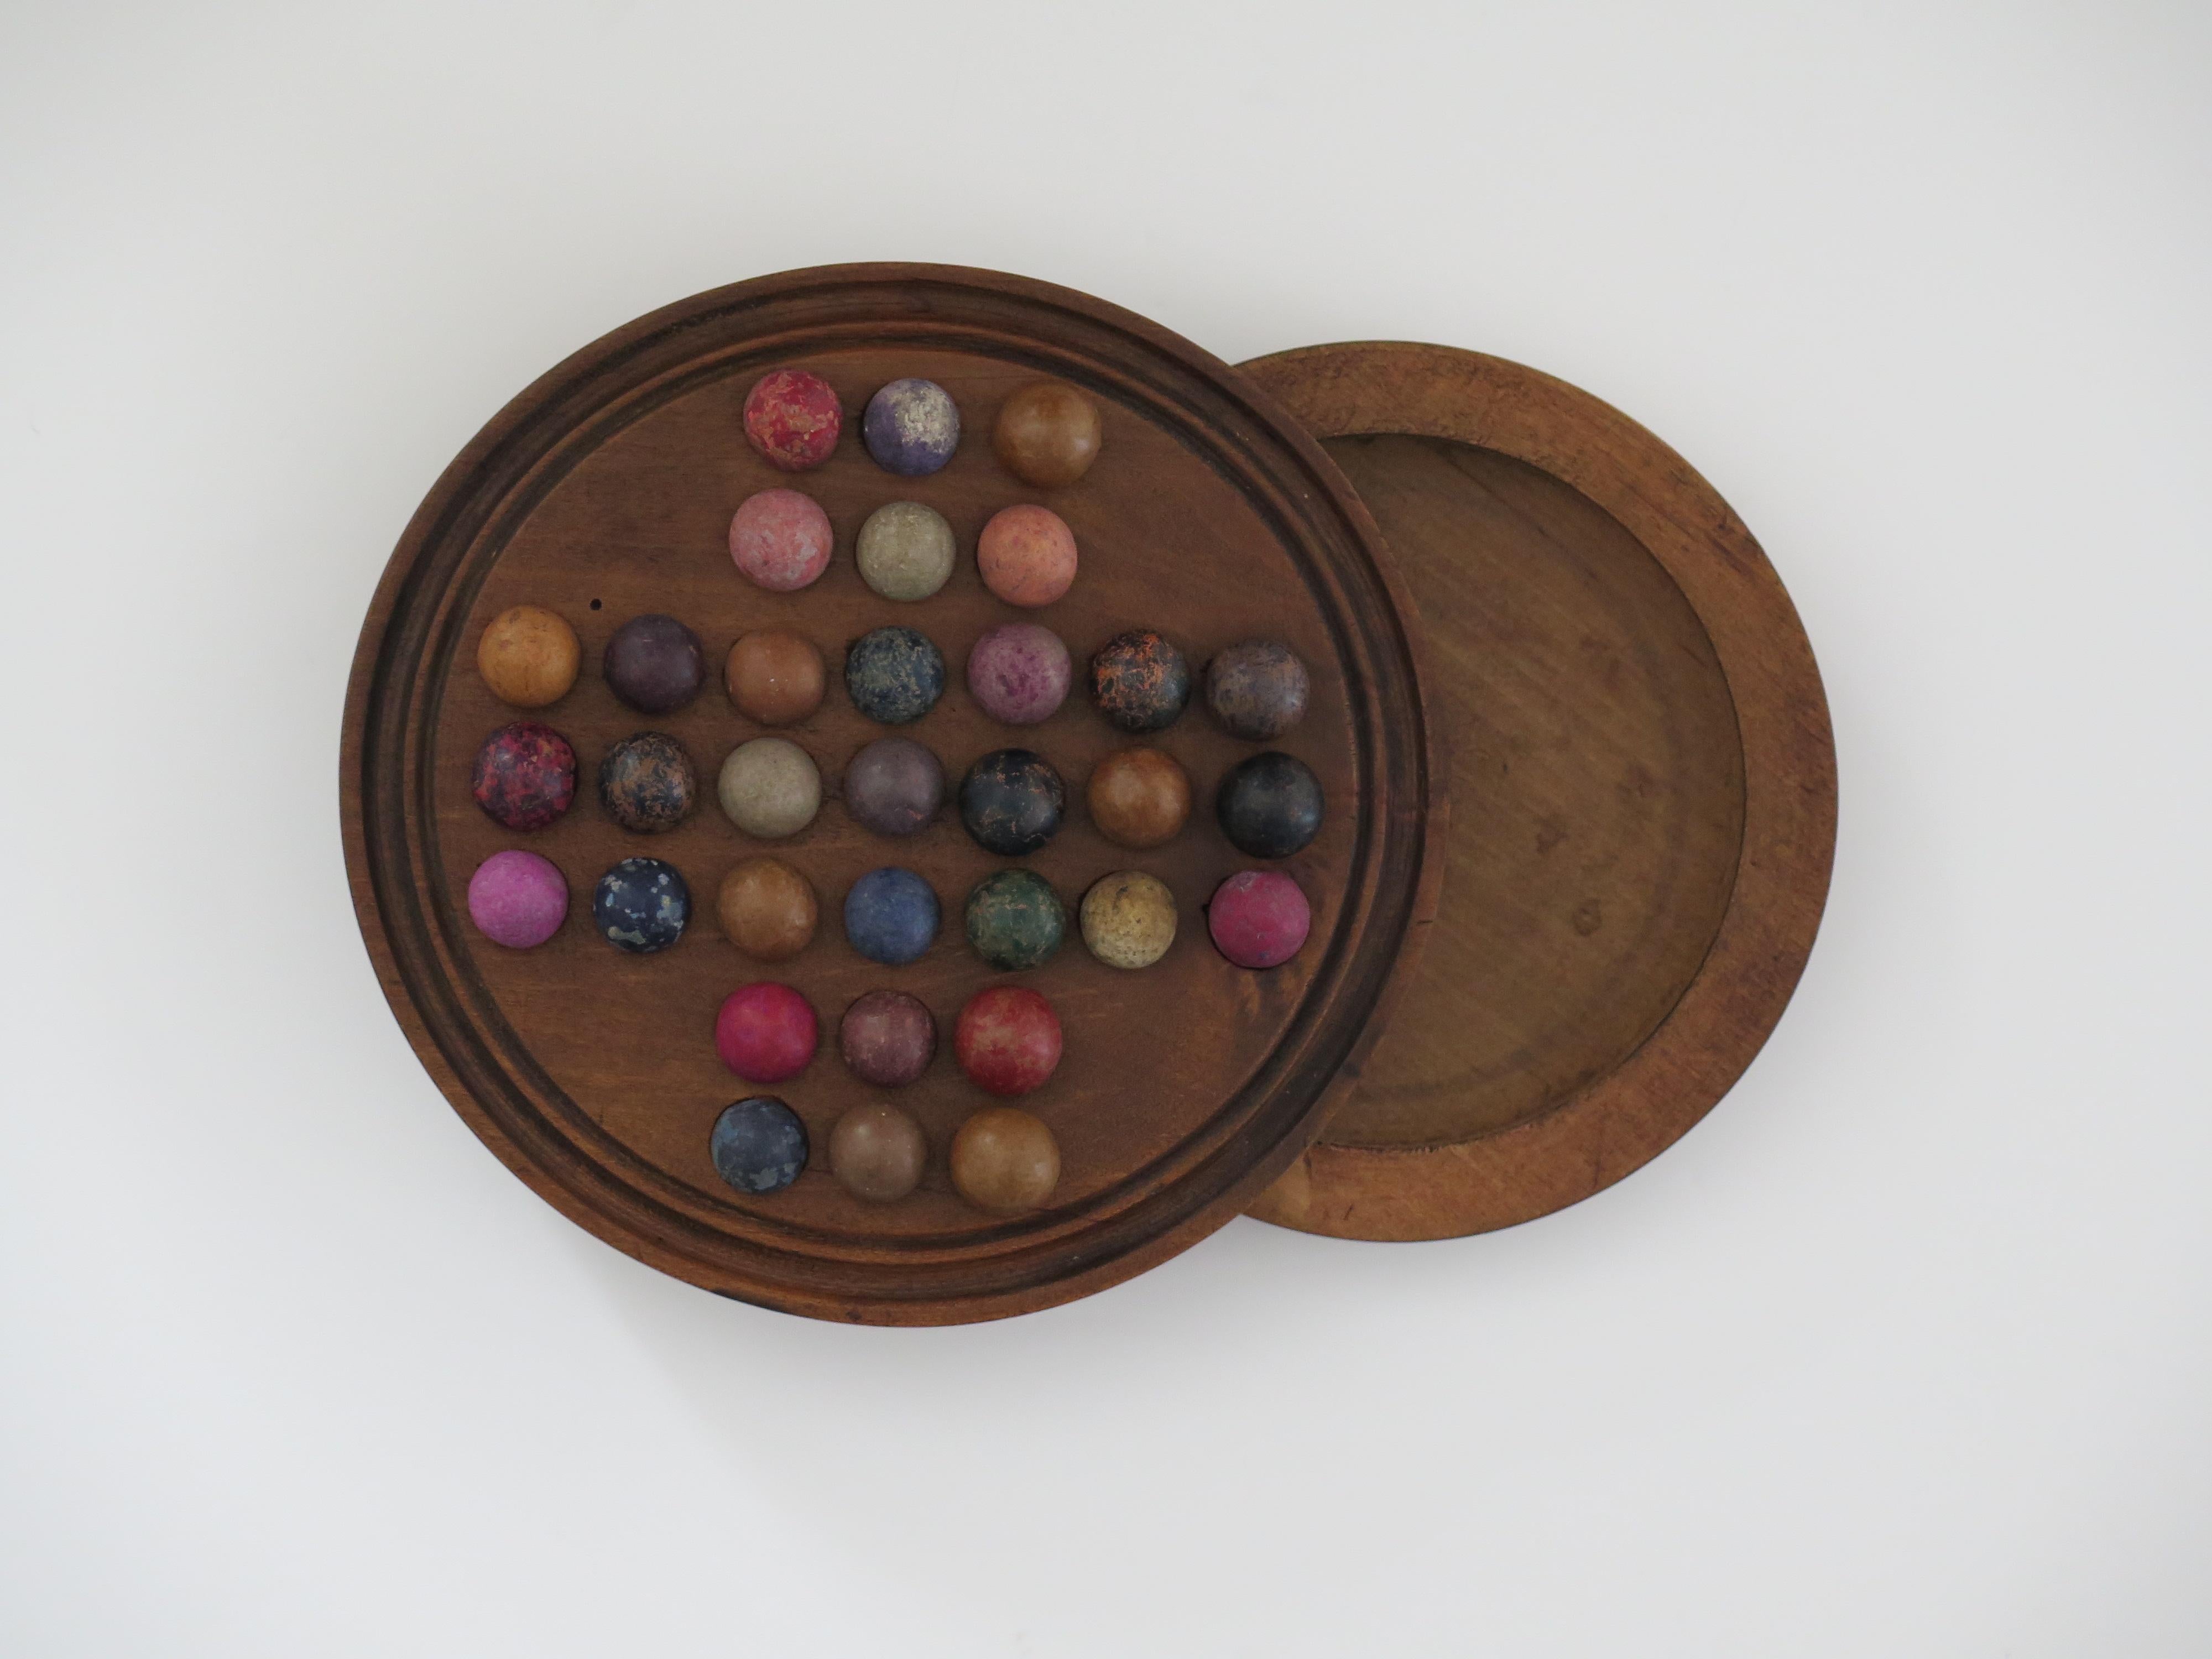 19th Century Travelling Marble Solitaire Game with 33 Handmade Clay Marbles